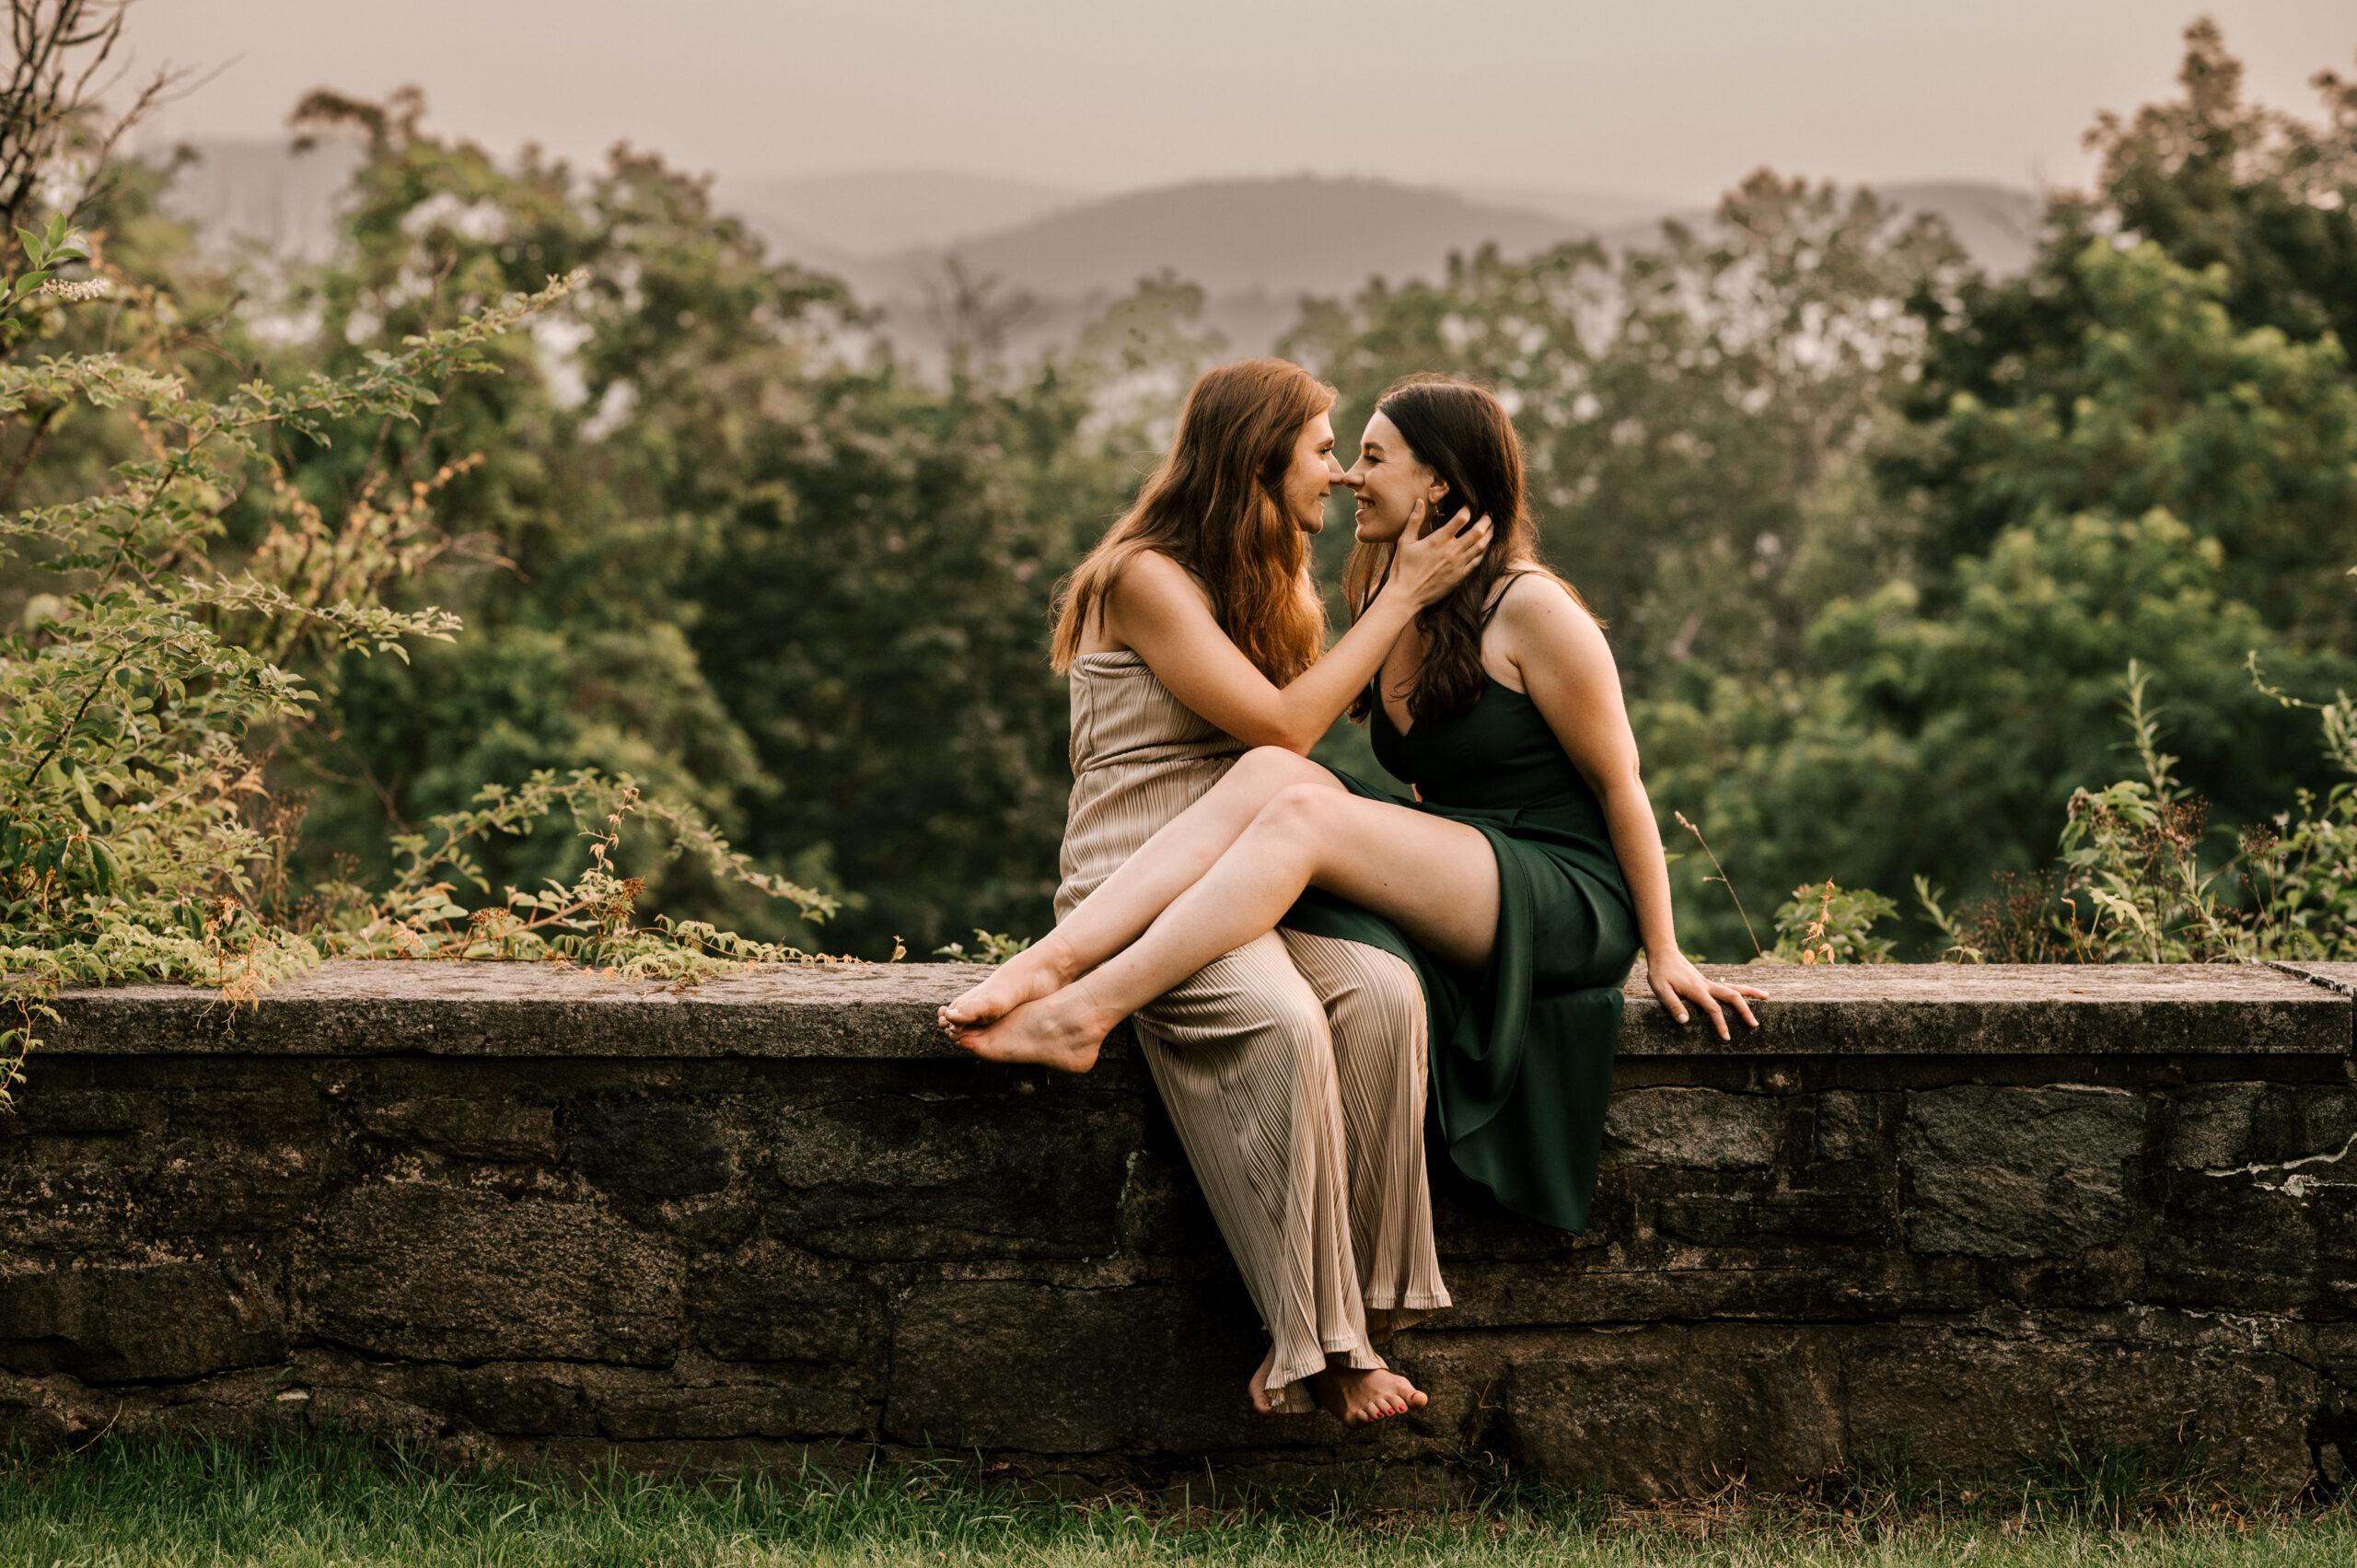 same sex female couple at skylands manor new jersey engagement session in ringwood in july. summer time warmth with views of the mountain ridges